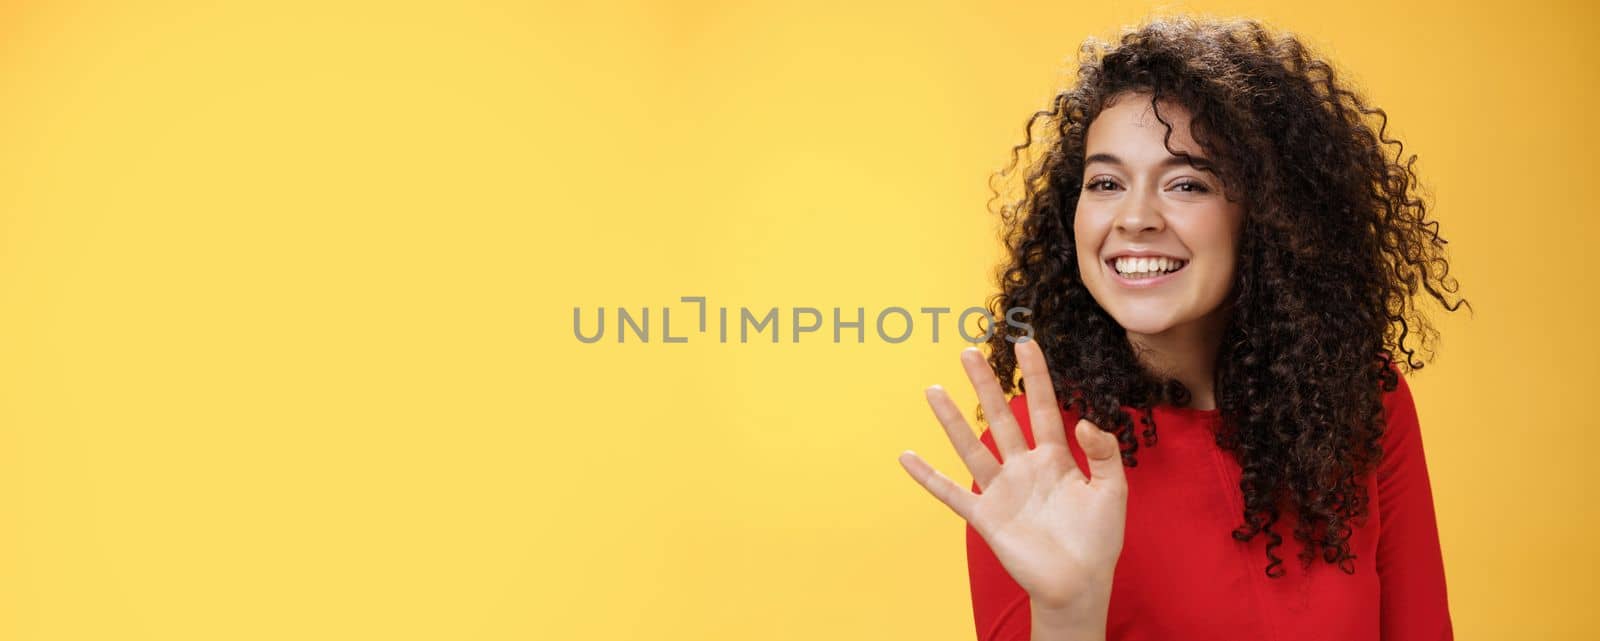 Lifestyle. Charming friendly and self-assured attractive curly woman waving cute with palm to say hi or hello smiling broadly greeting man trying flirt in party posing joyful over yellow background.